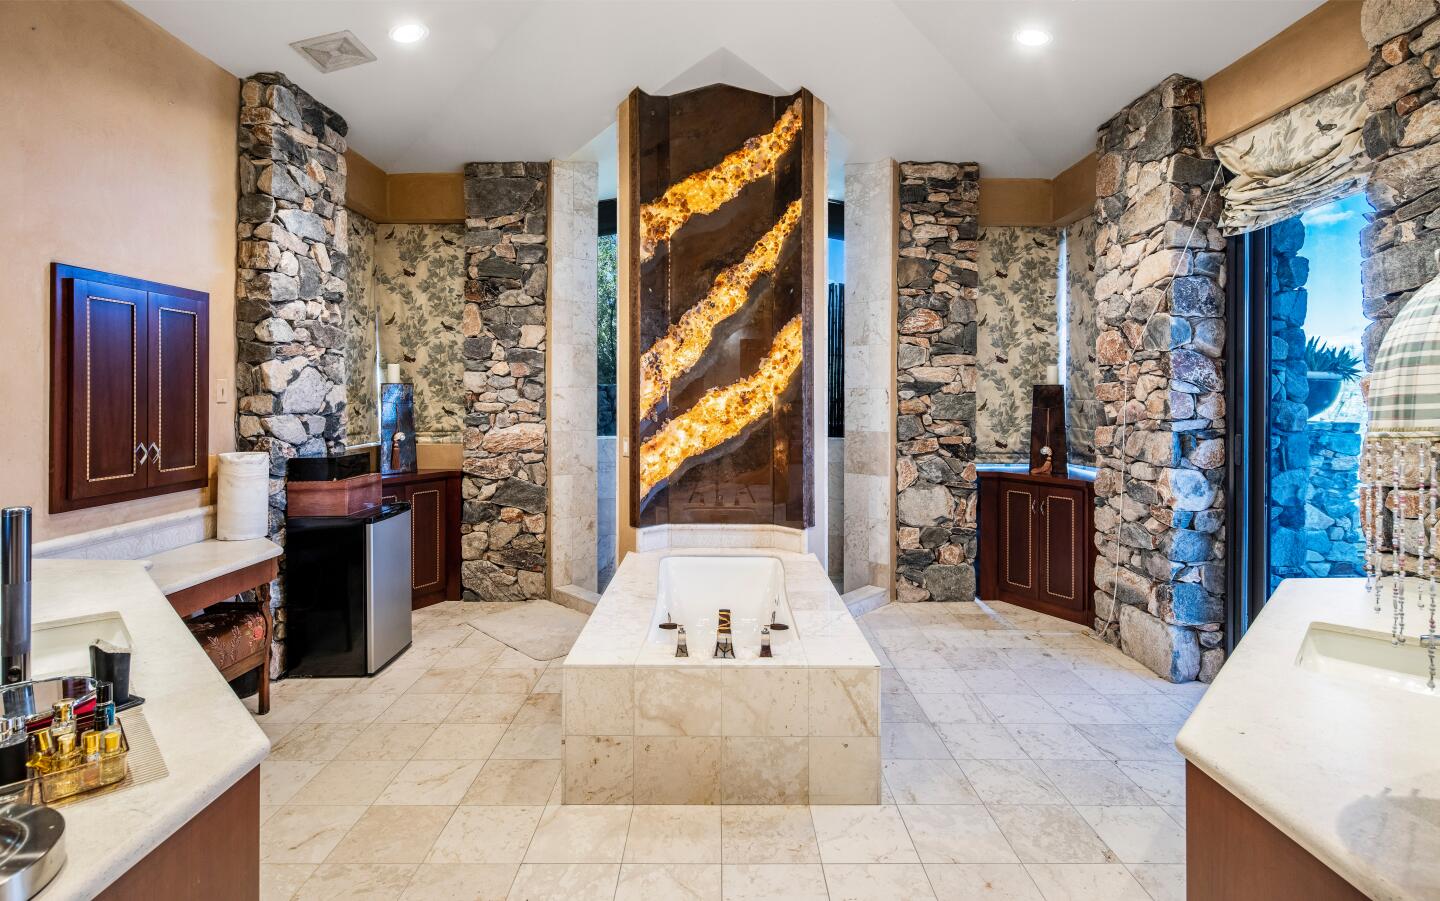 The bathroom has stone flooring and walls with windows and a bathtub